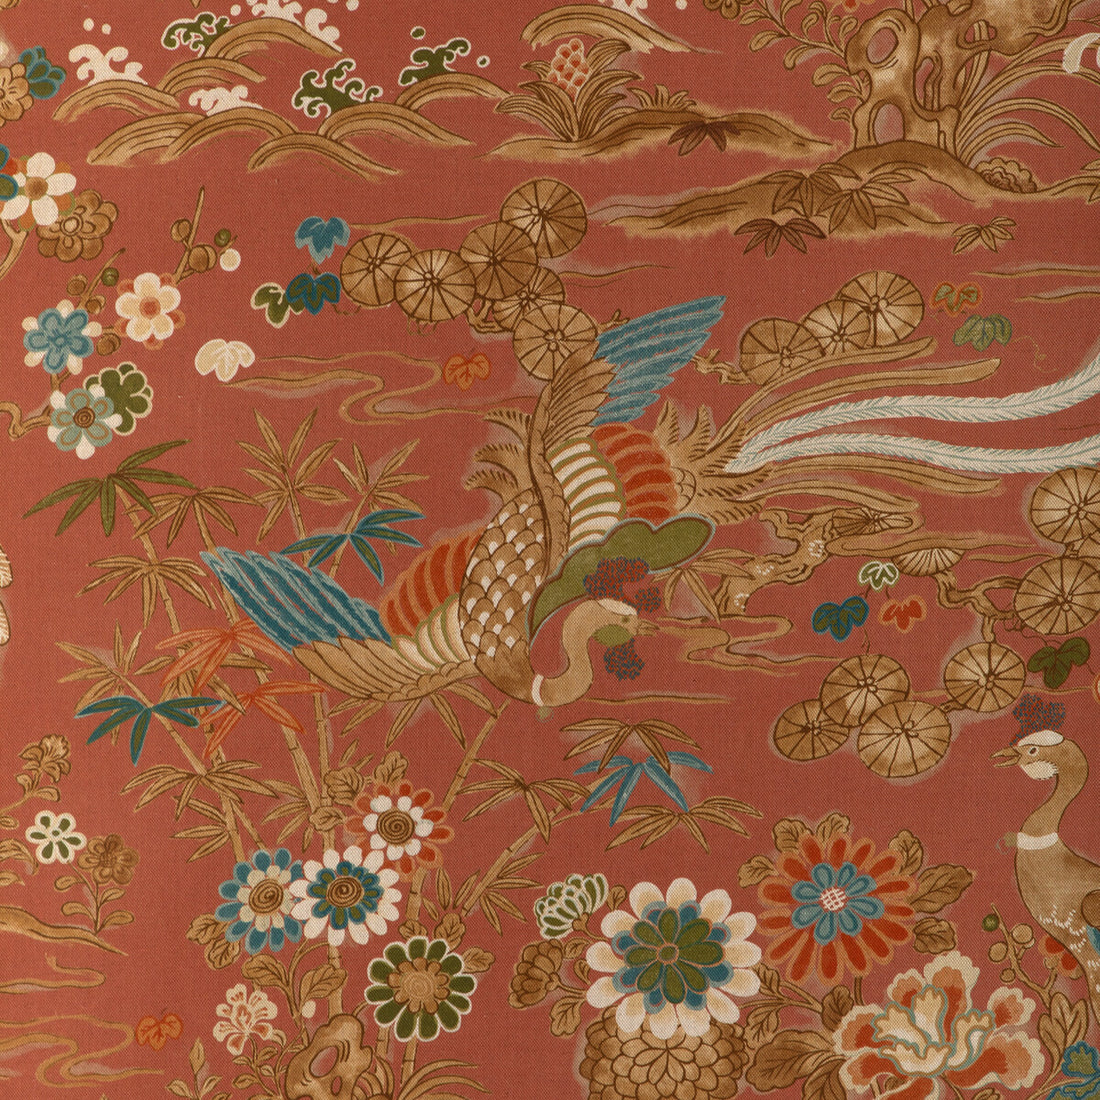 Sakura Print fabric in clay color - pattern 2023139.24.0 - by Lee Jofa in the Garden Walk collection